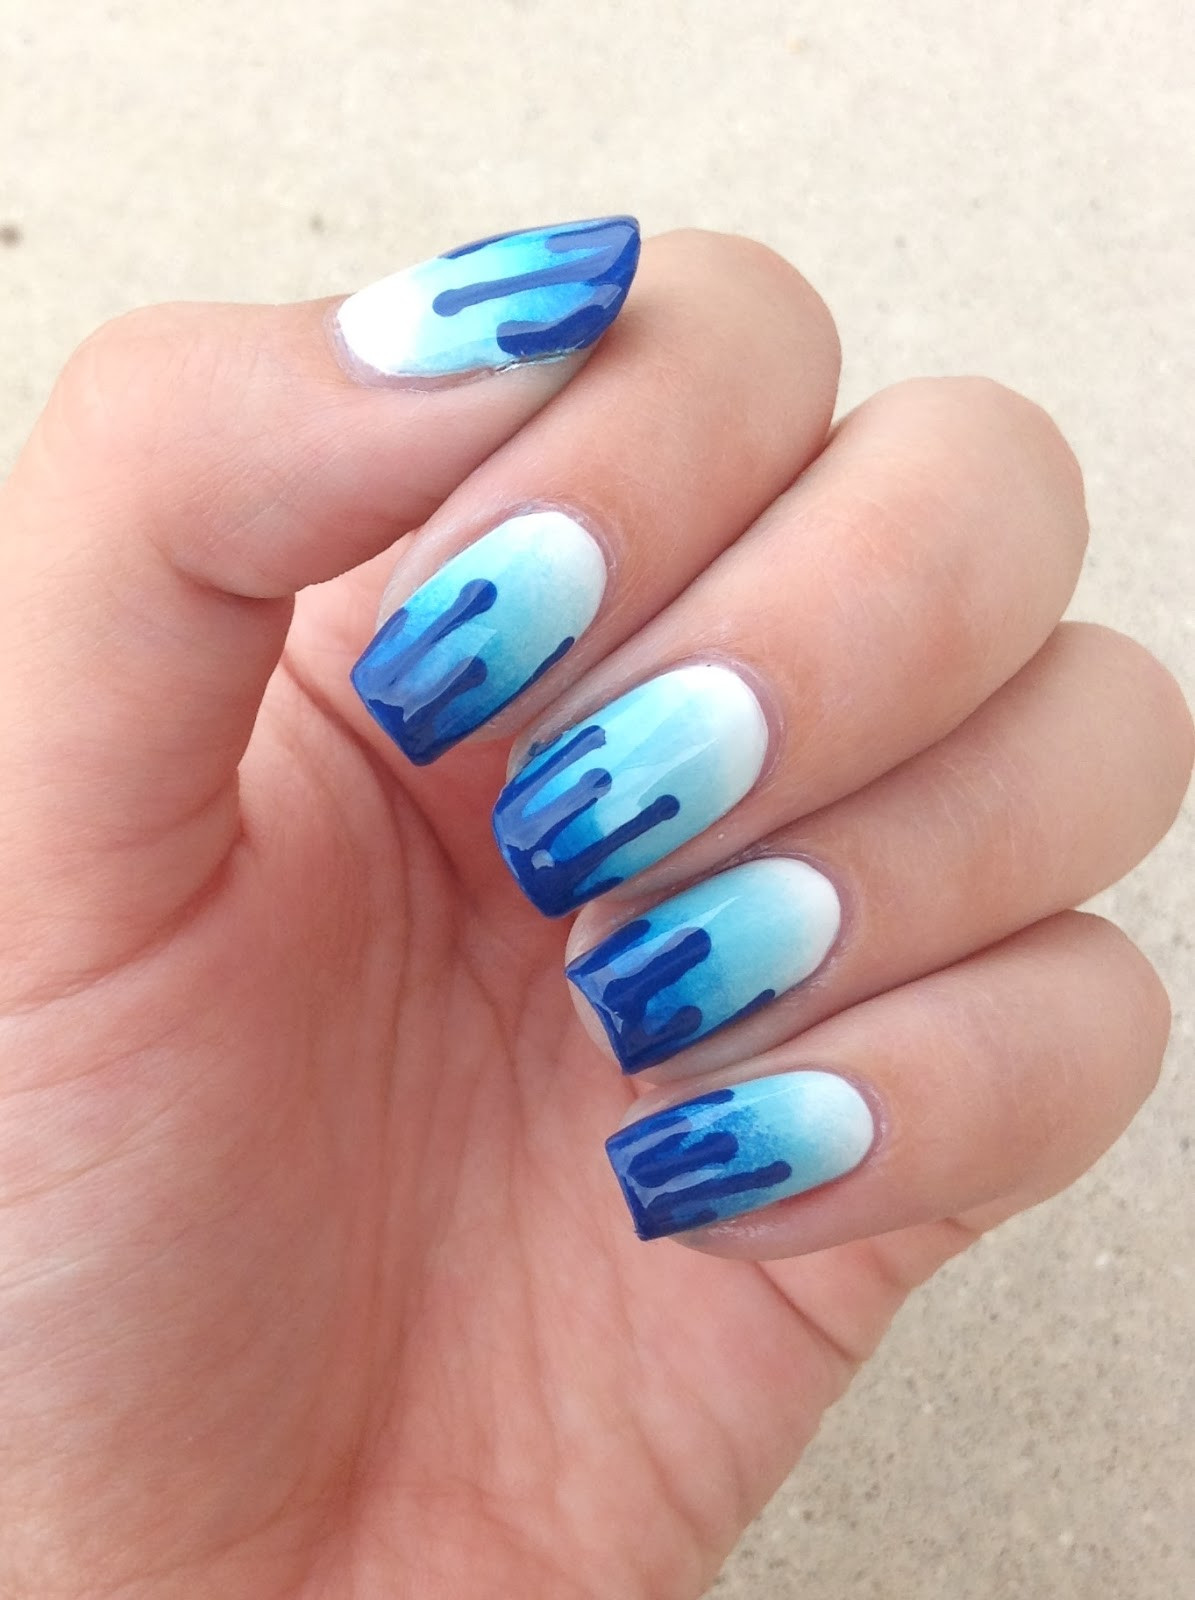 August Nail Designs
 Nails By Bayles August Challenge Ombre Nail Art